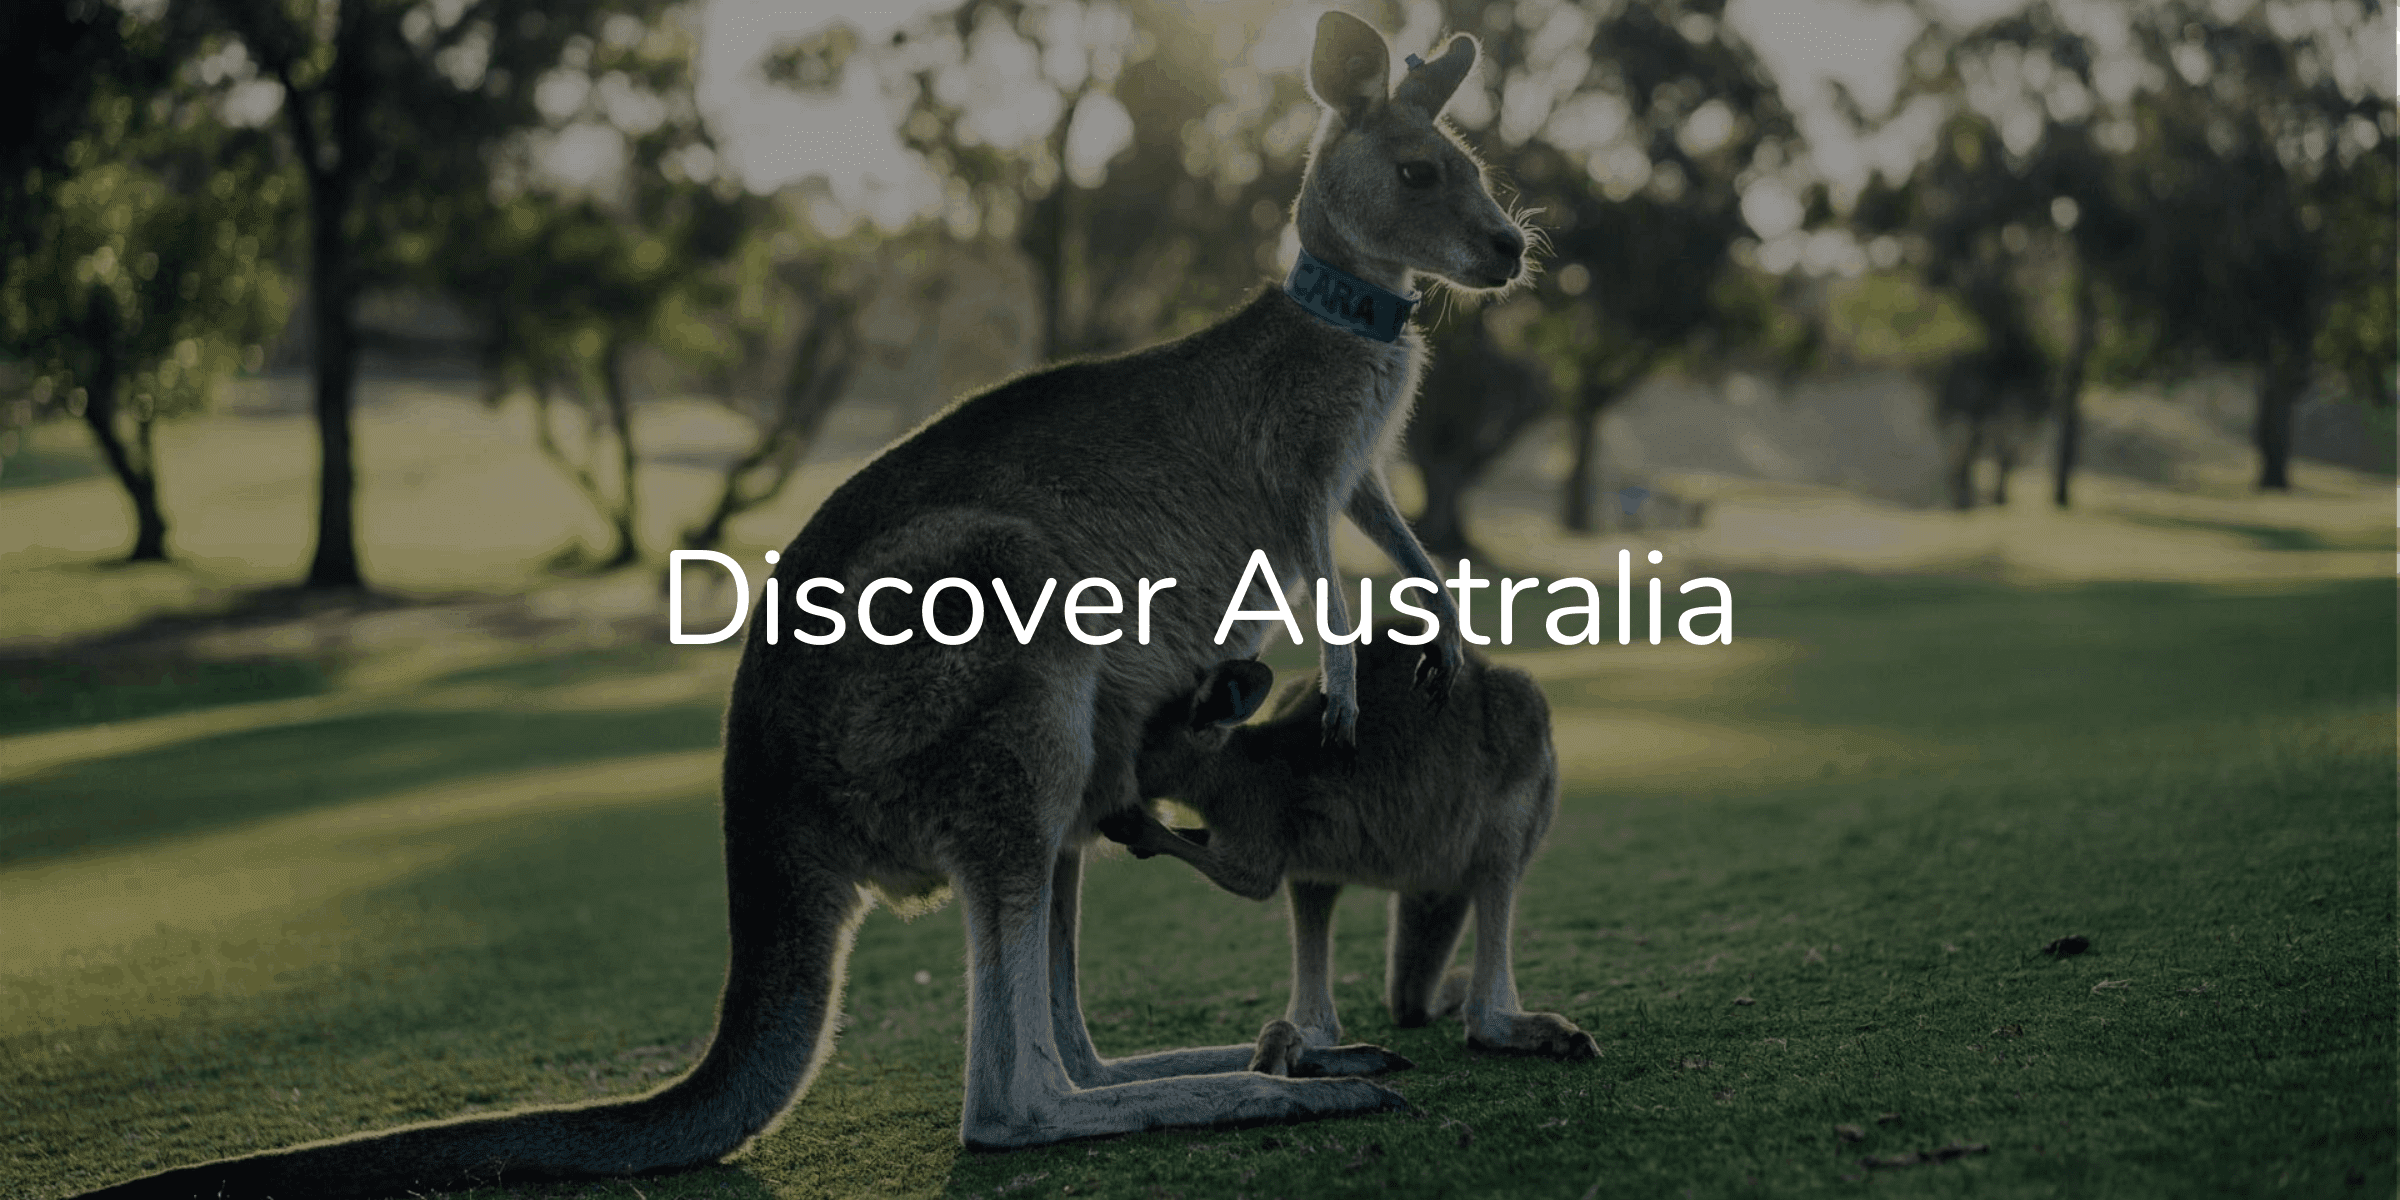 Discover Australia on Sterling Healthcare Resourcing